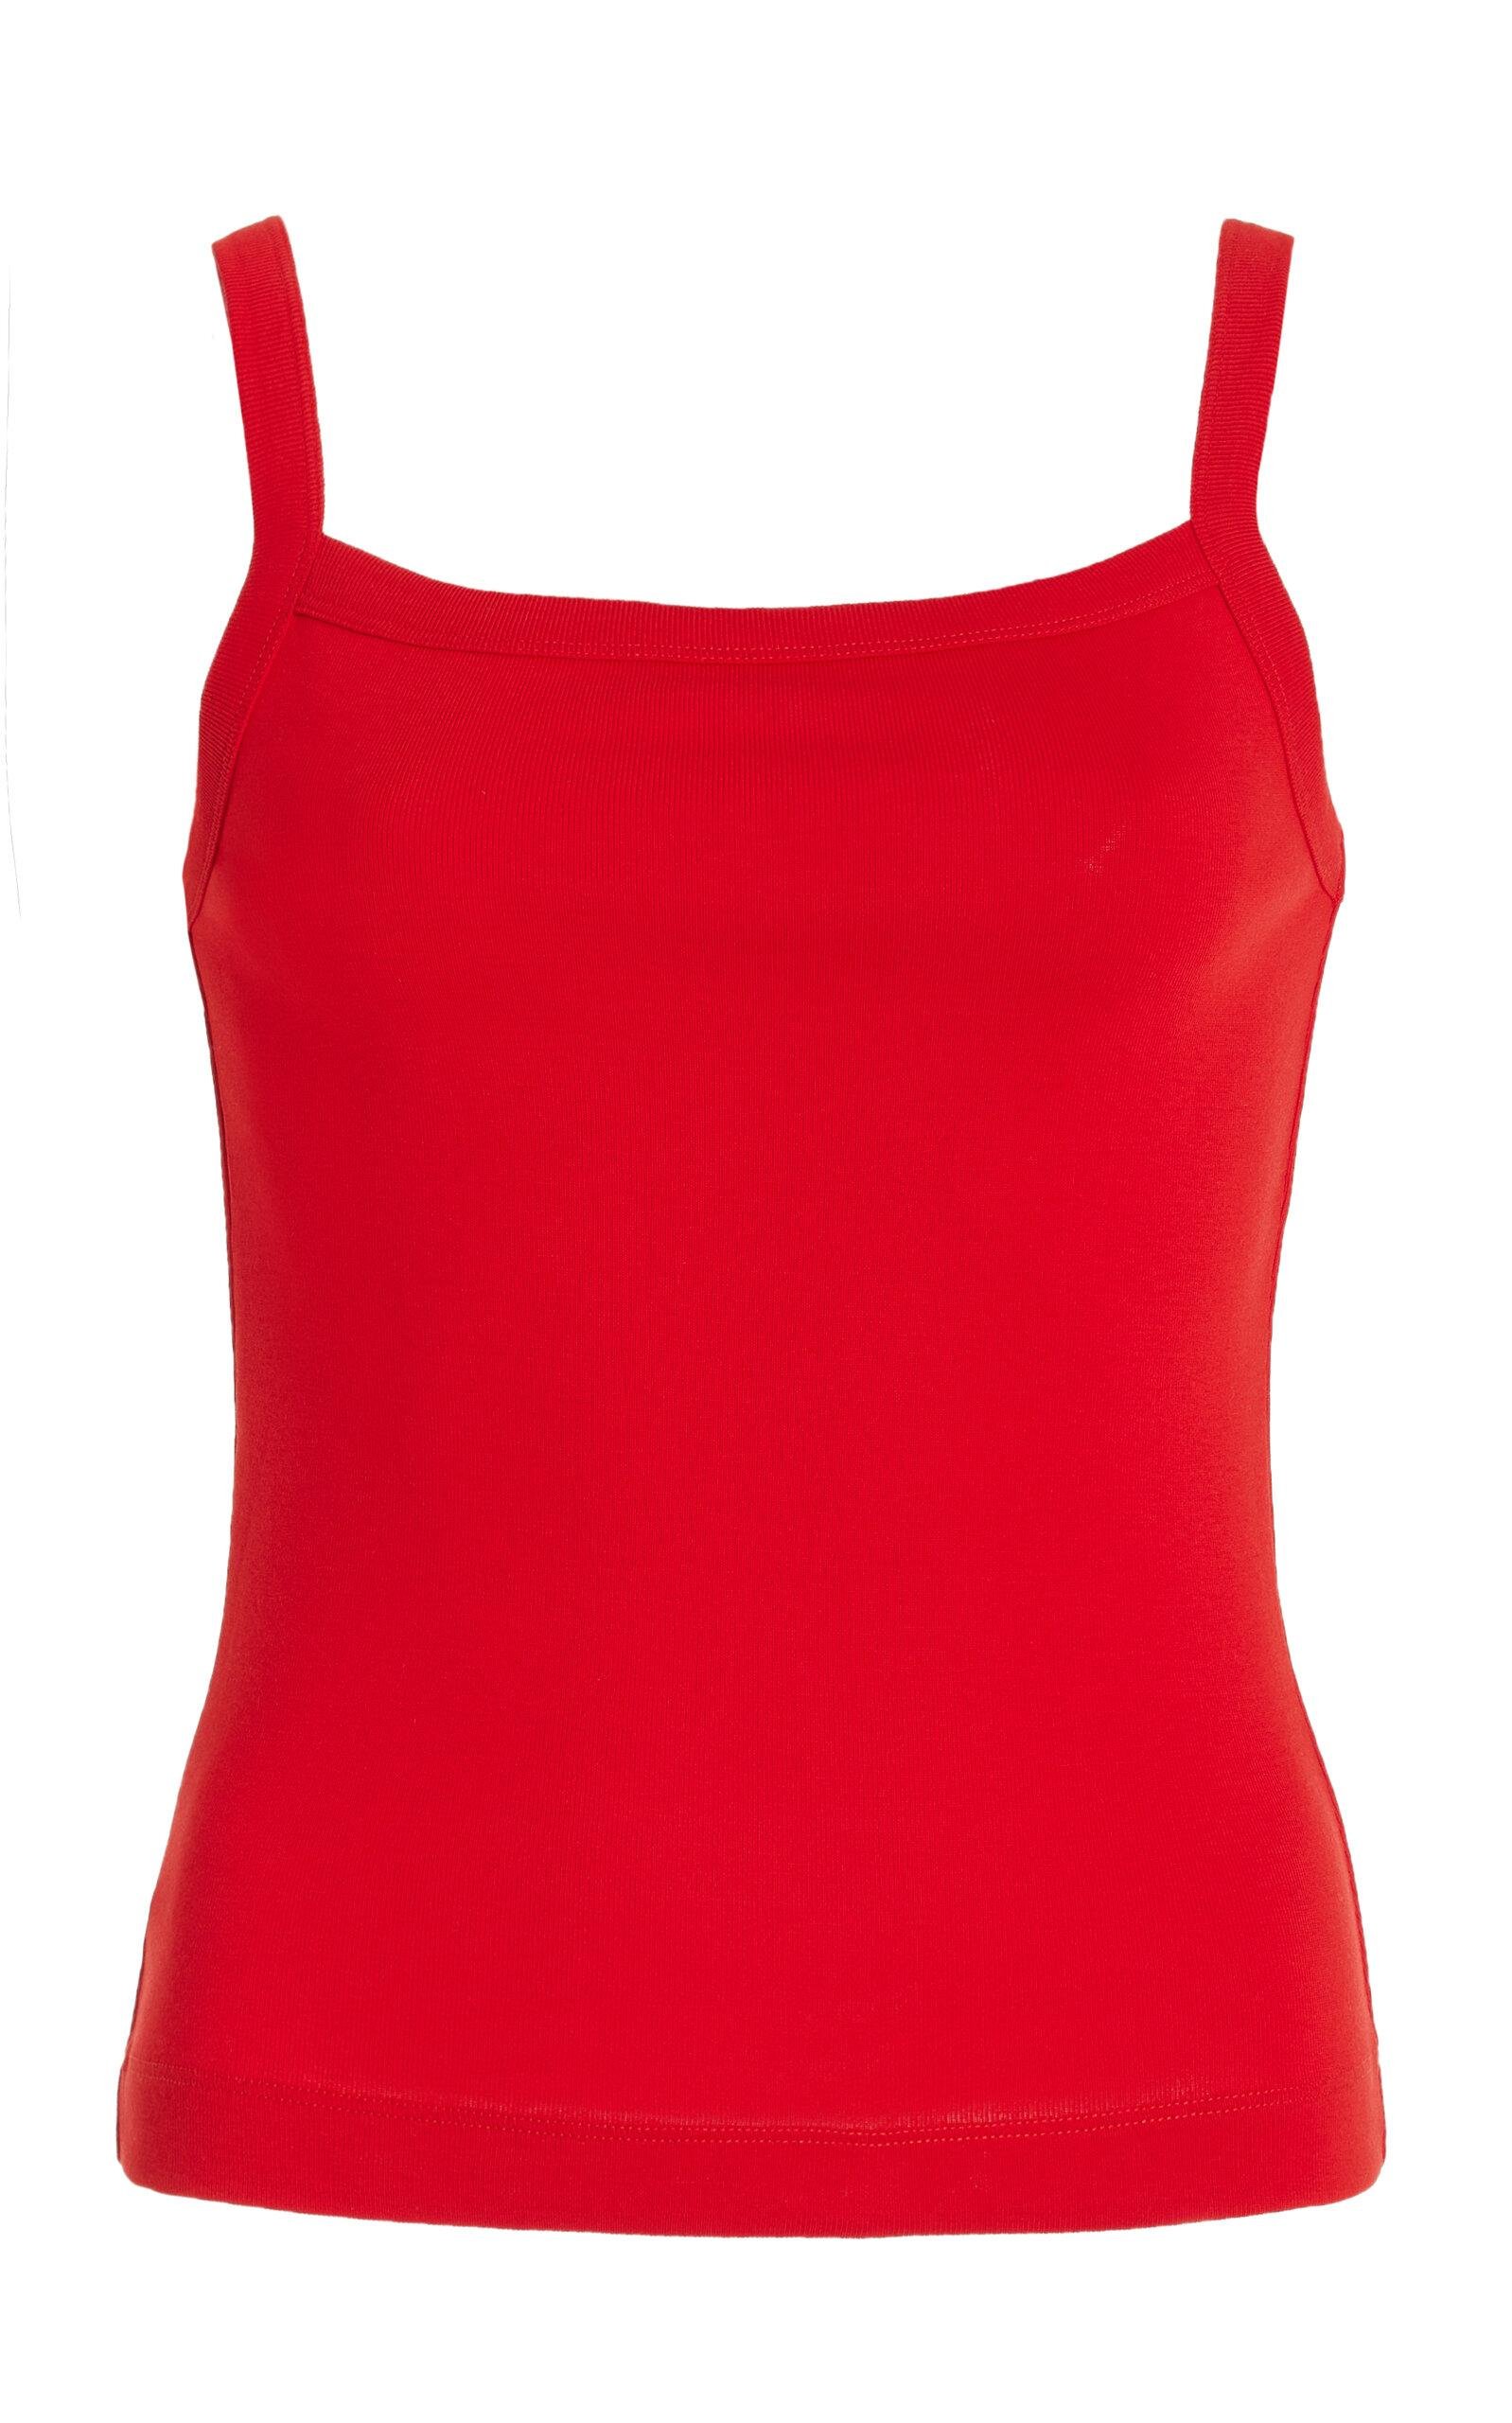 Flore Flore - May Organic Cotton Camisole Top - Red - L - Moda Operandi by FLORE FLORE